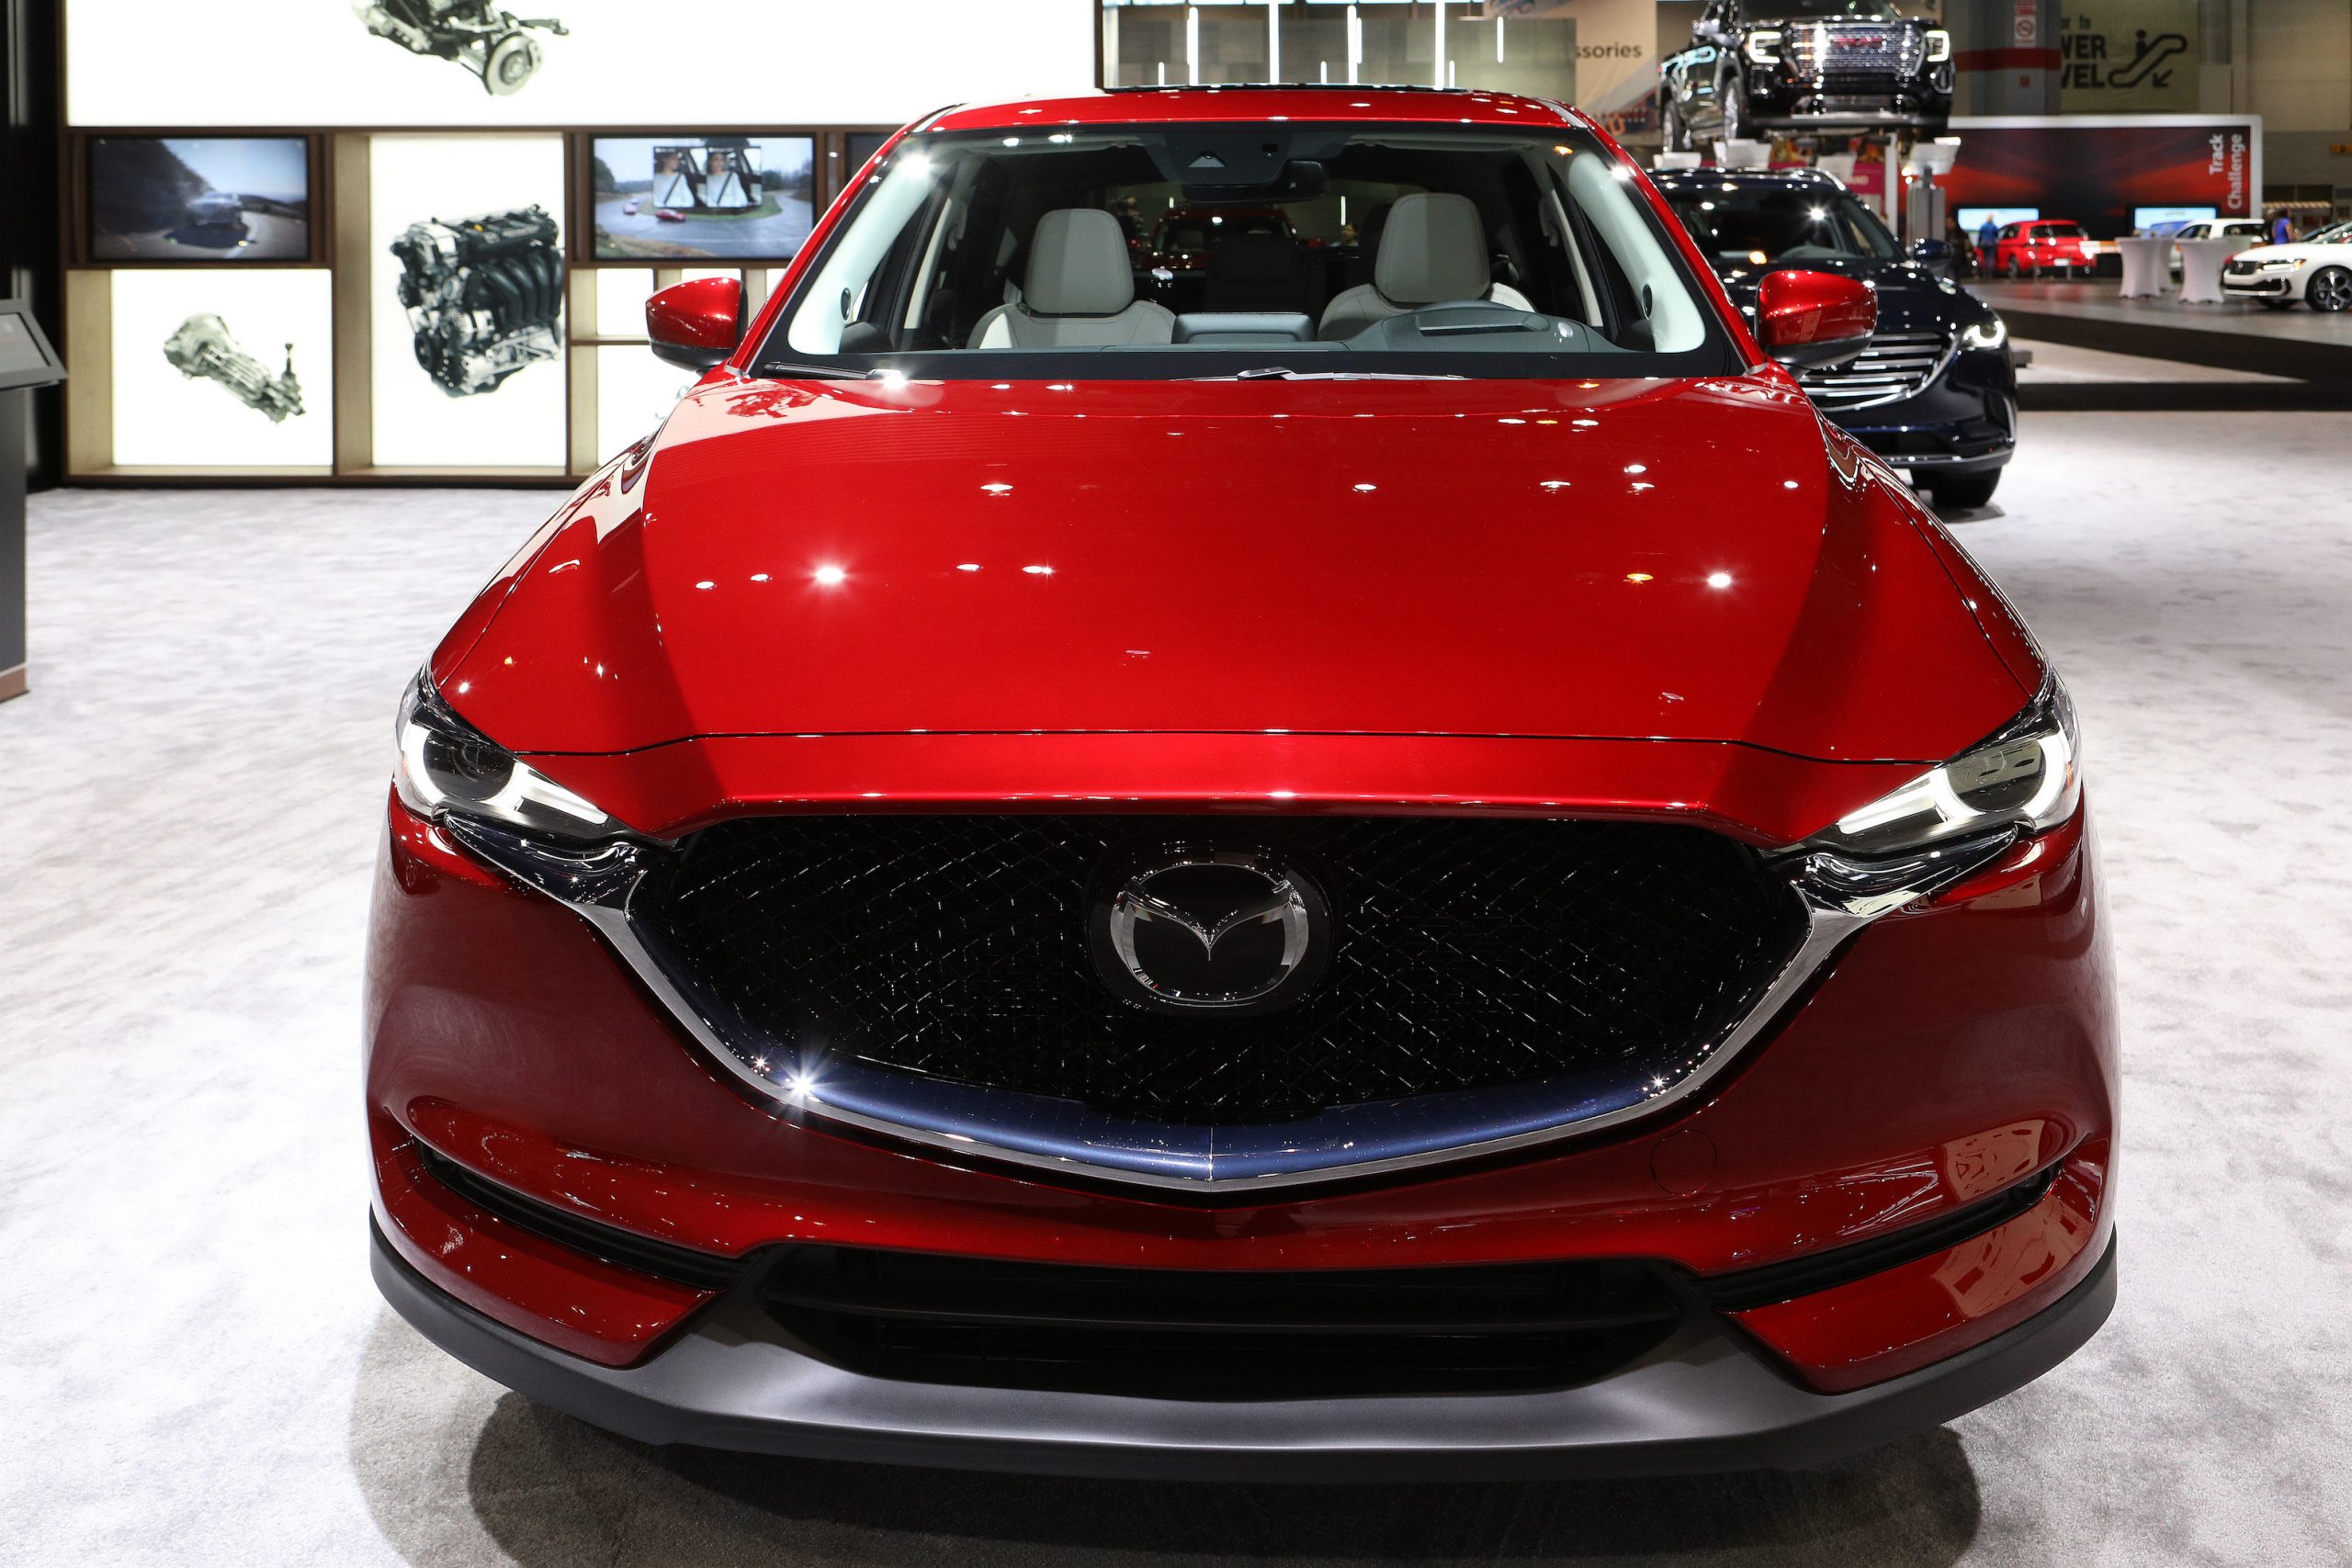 Red 2019 Mazda CX-5 is on display at the 111th Annual Chicago Auto Show